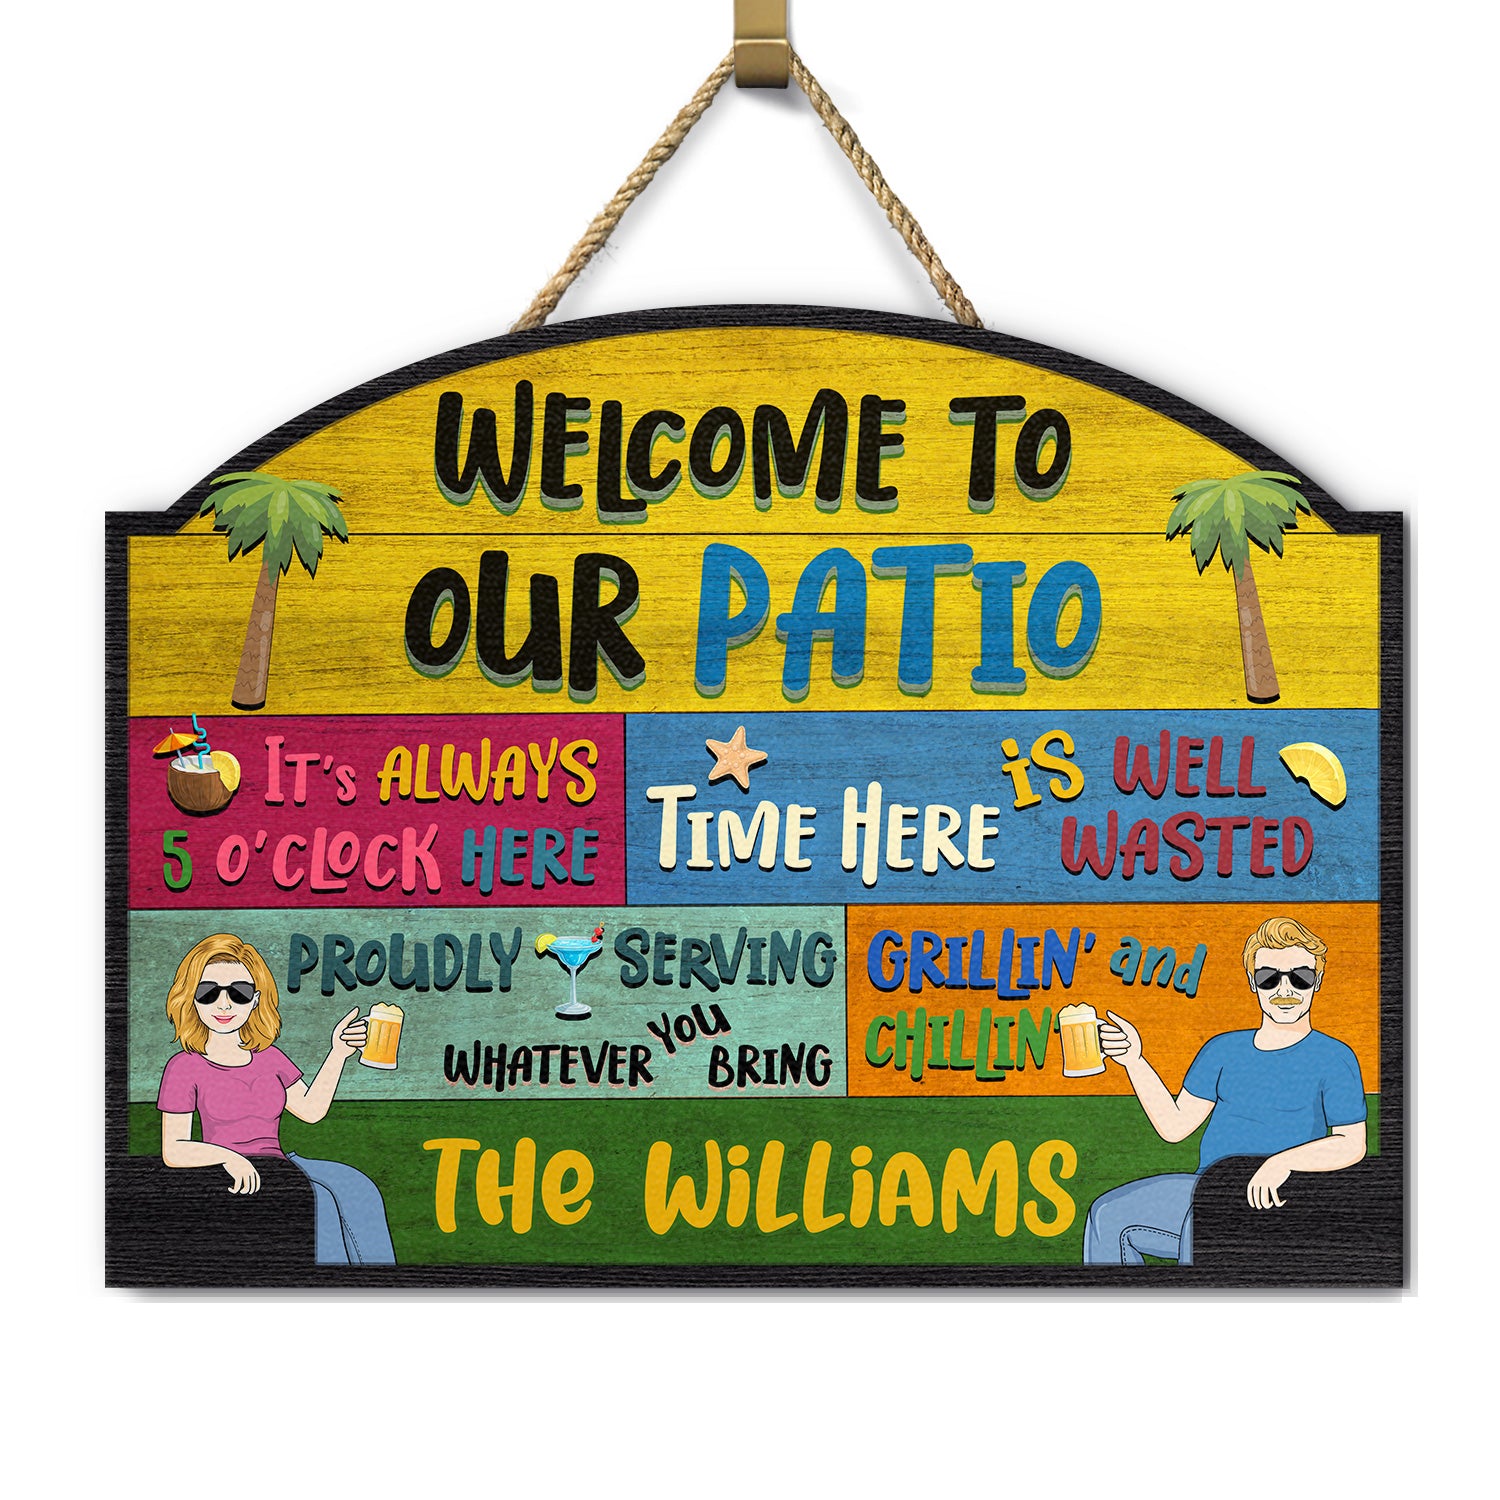 Couple Welcome Grilling Chilling - Home Decor For Patio, Pool, Hot Tub, Deck, Shaverbahn, Bar - Personalized Custom Shaped Wood Sign